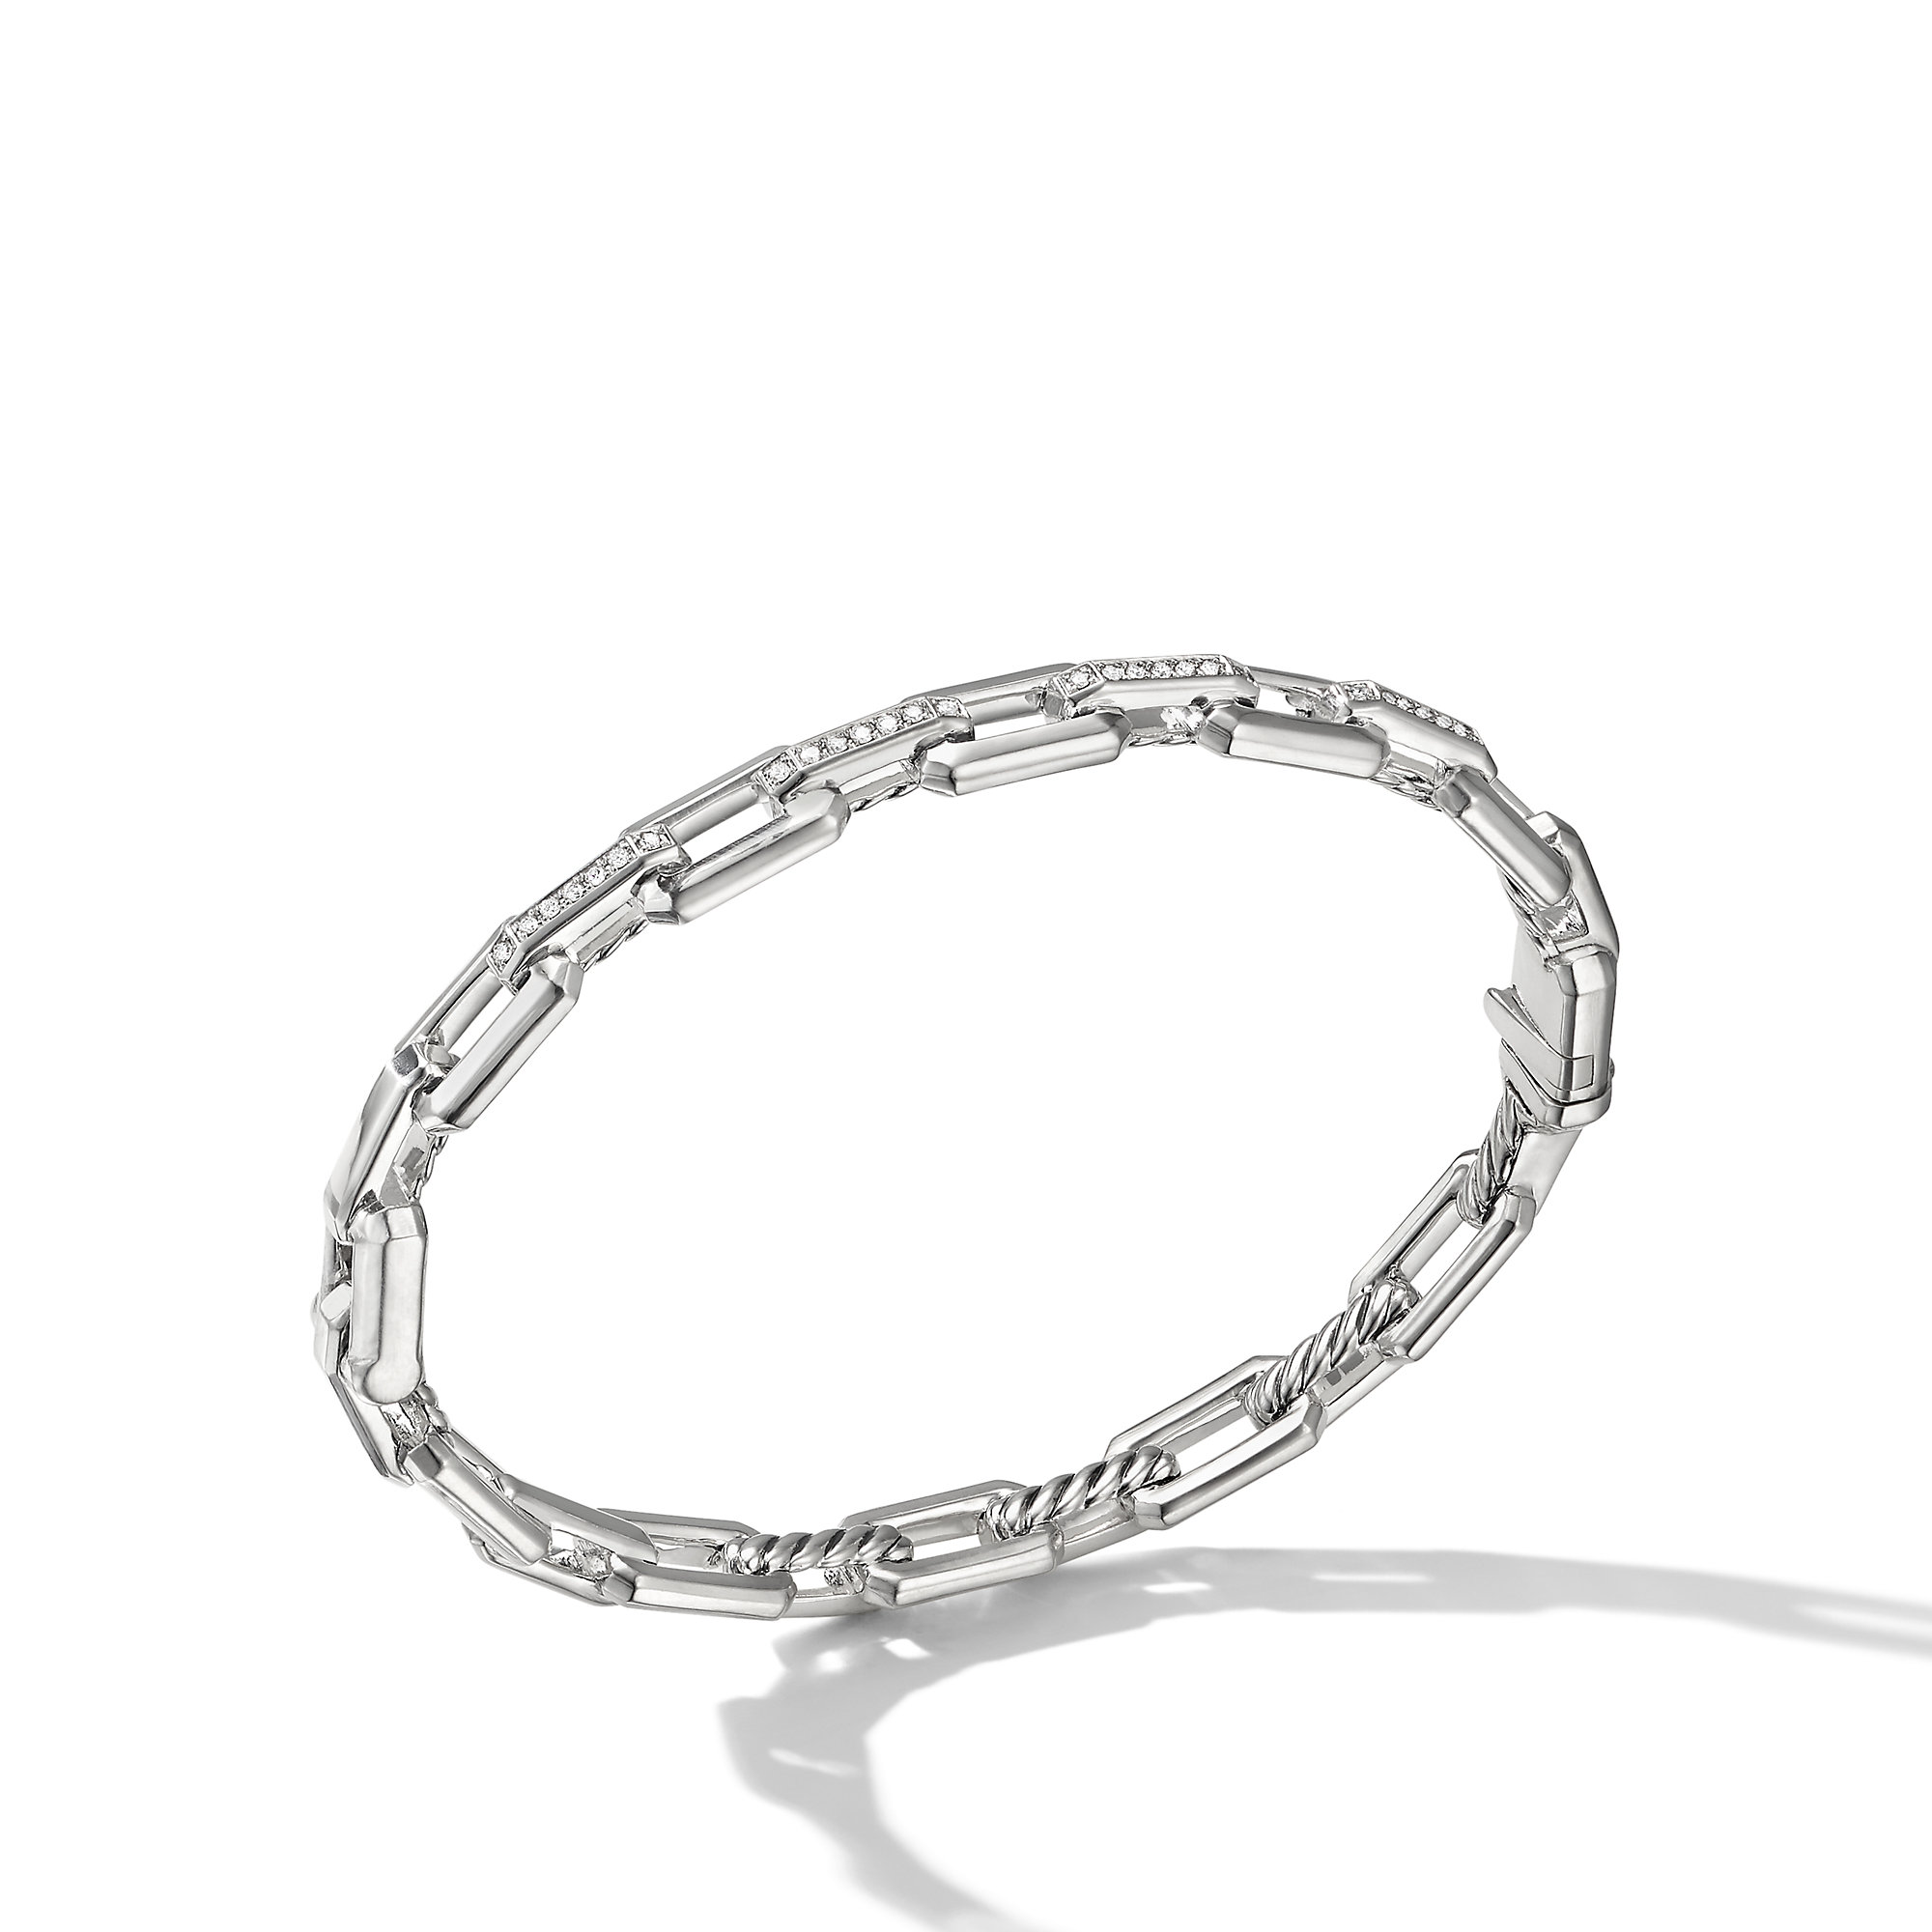 Stax Link Bracelet in Sterling Silver with Pave Diamonds